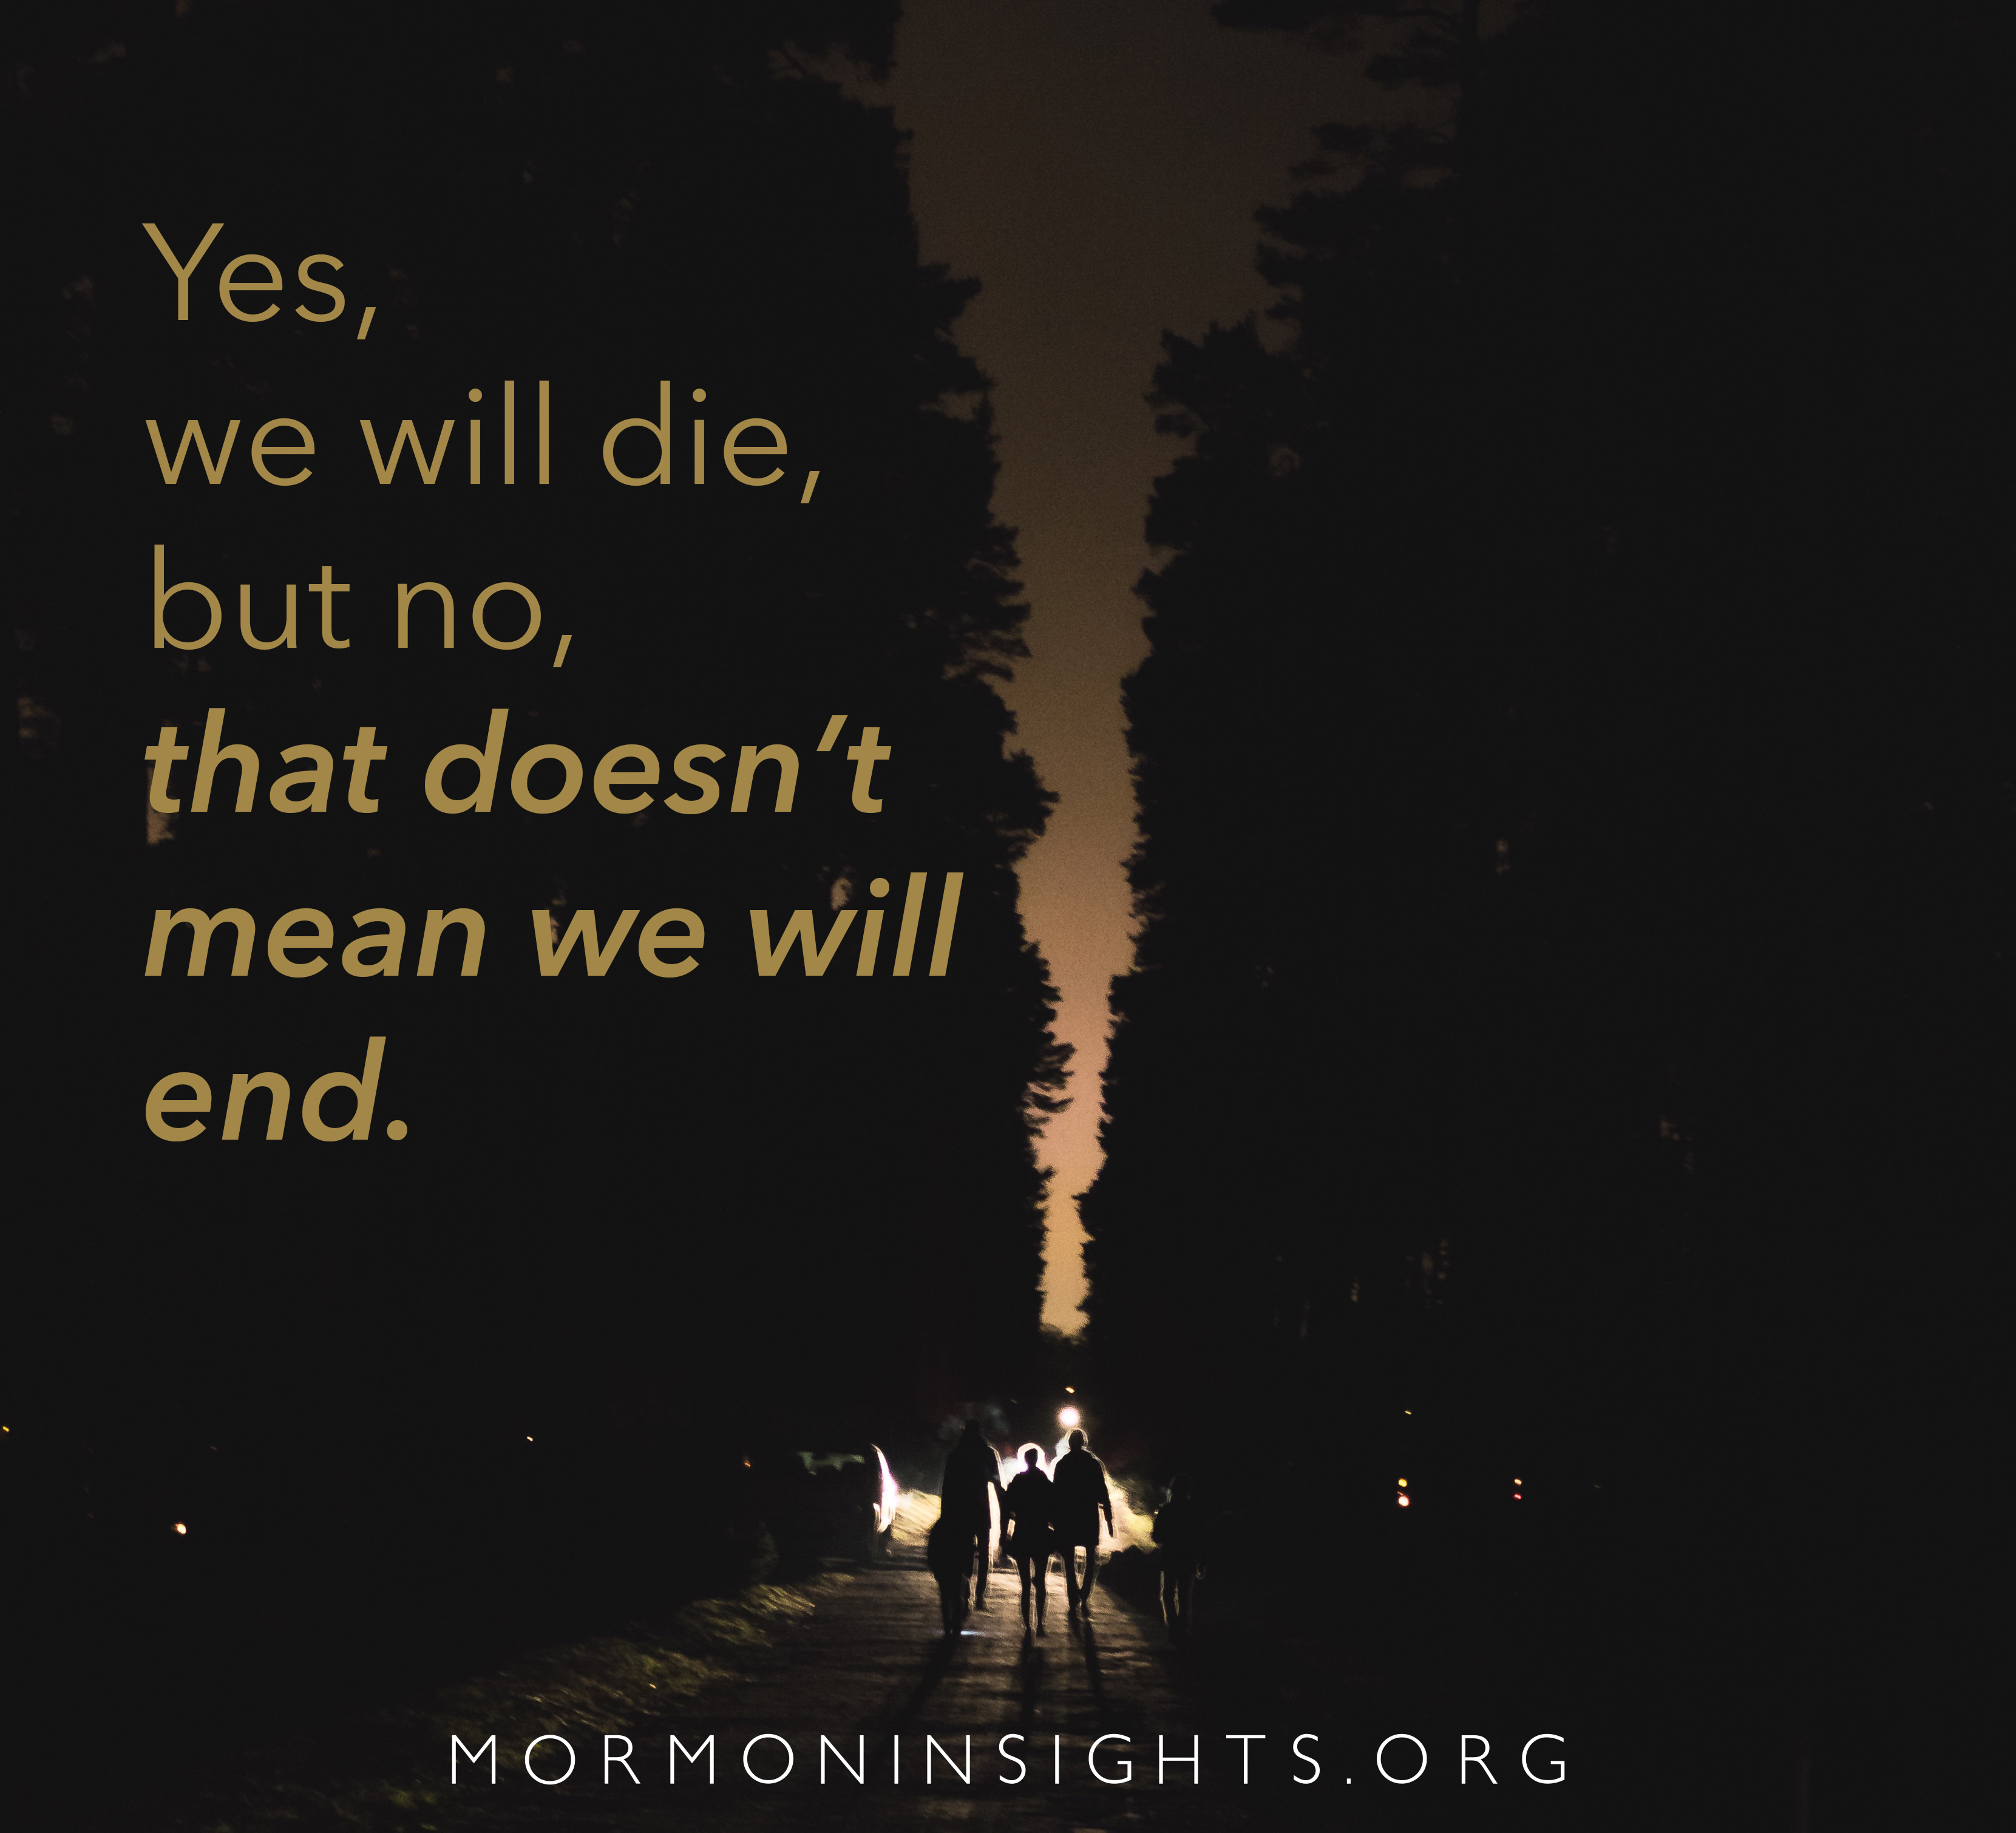 picture quote: "Yes, we will die, but no, that doesn't mean we will end." with people walking toward a light